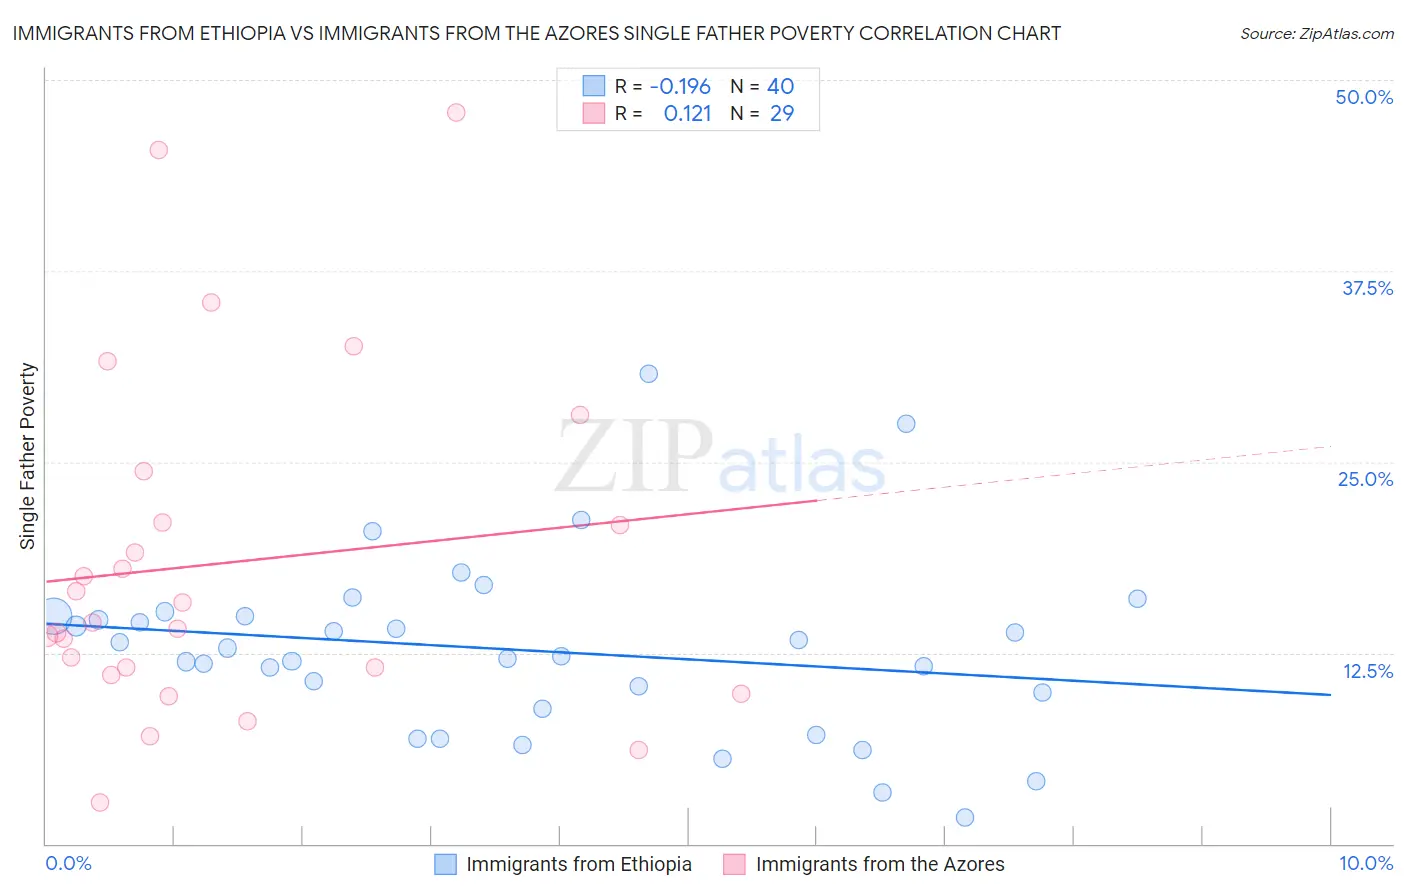 Immigrants from Ethiopia vs Immigrants from the Azores Single Father Poverty